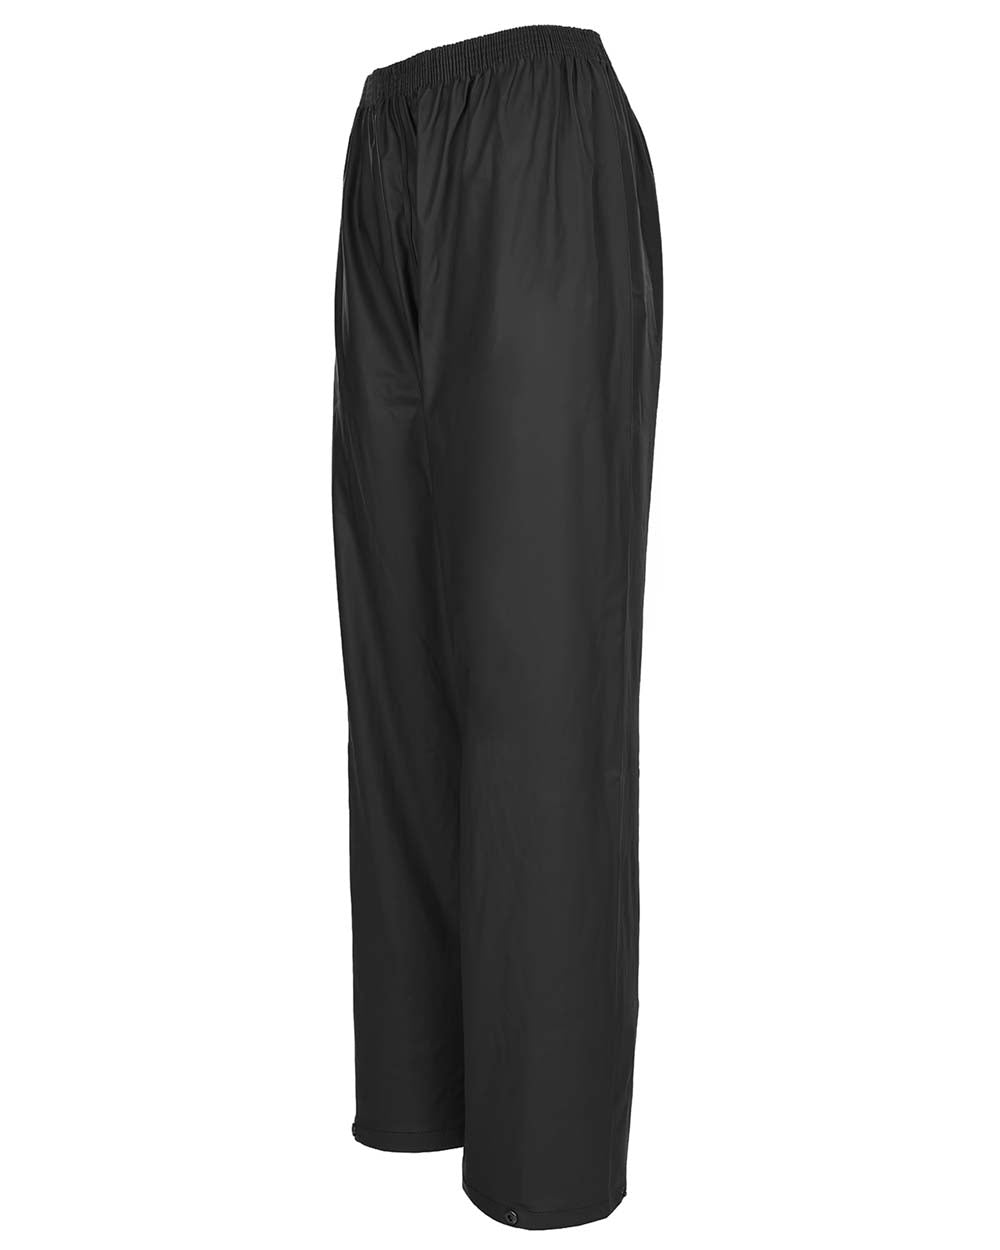 Black Coloured Fort Airflex Waterproof Breathable Trousers On A White Background 